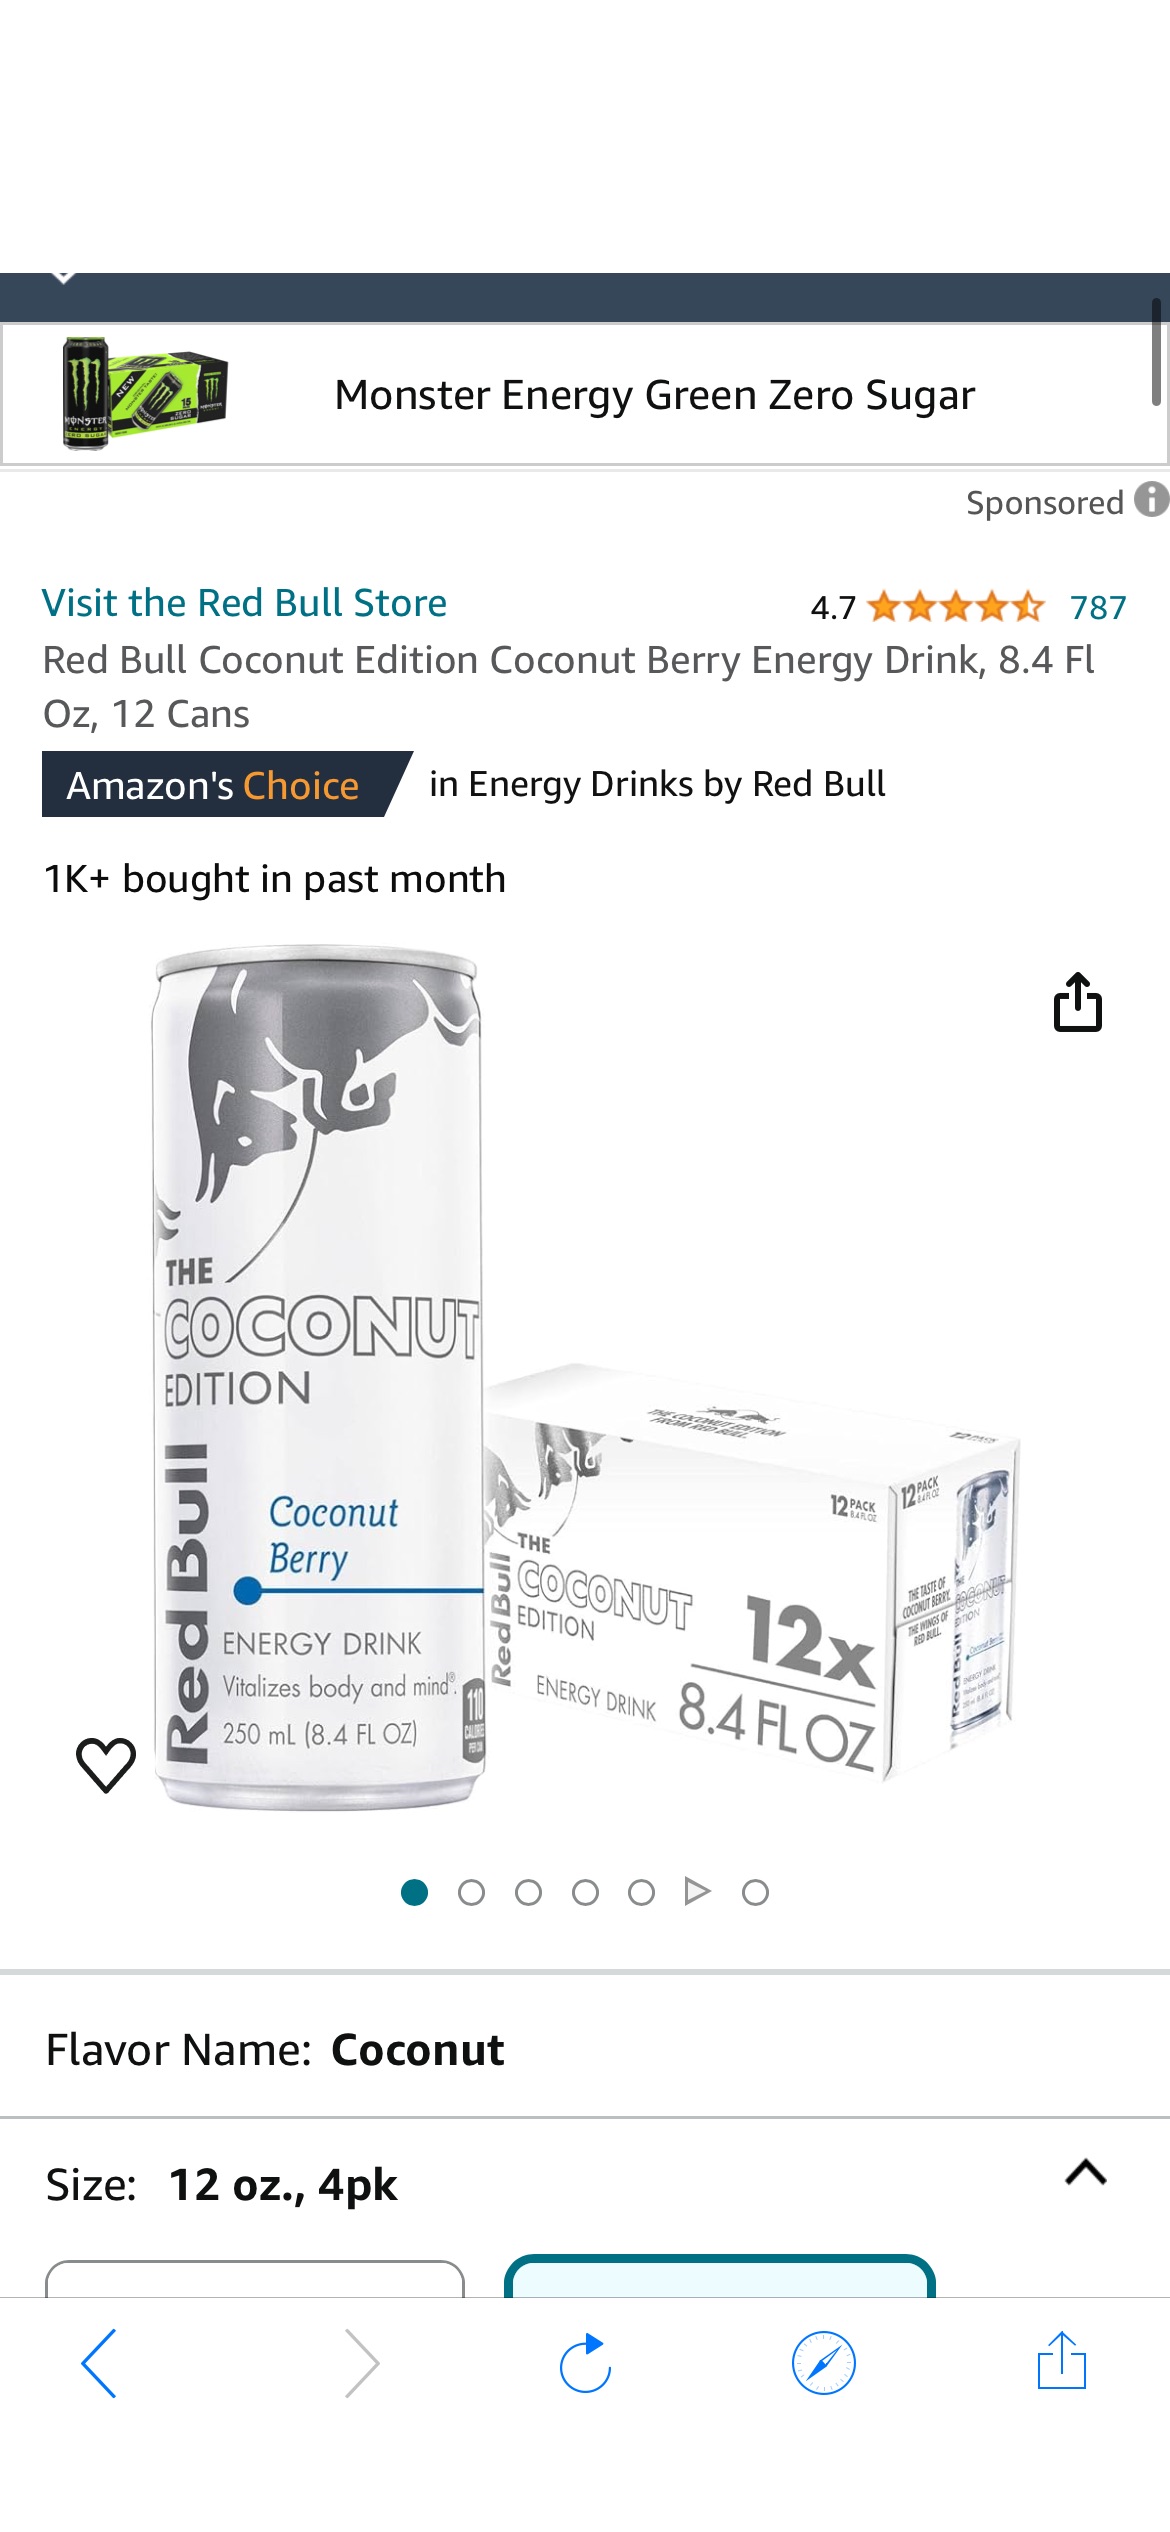 Amazon.com : Red Bull Coconut Edition Coconut Berry Energy Drink, 8.4 Fl Oz, 12 Cans : Grocery & Gourmet Food